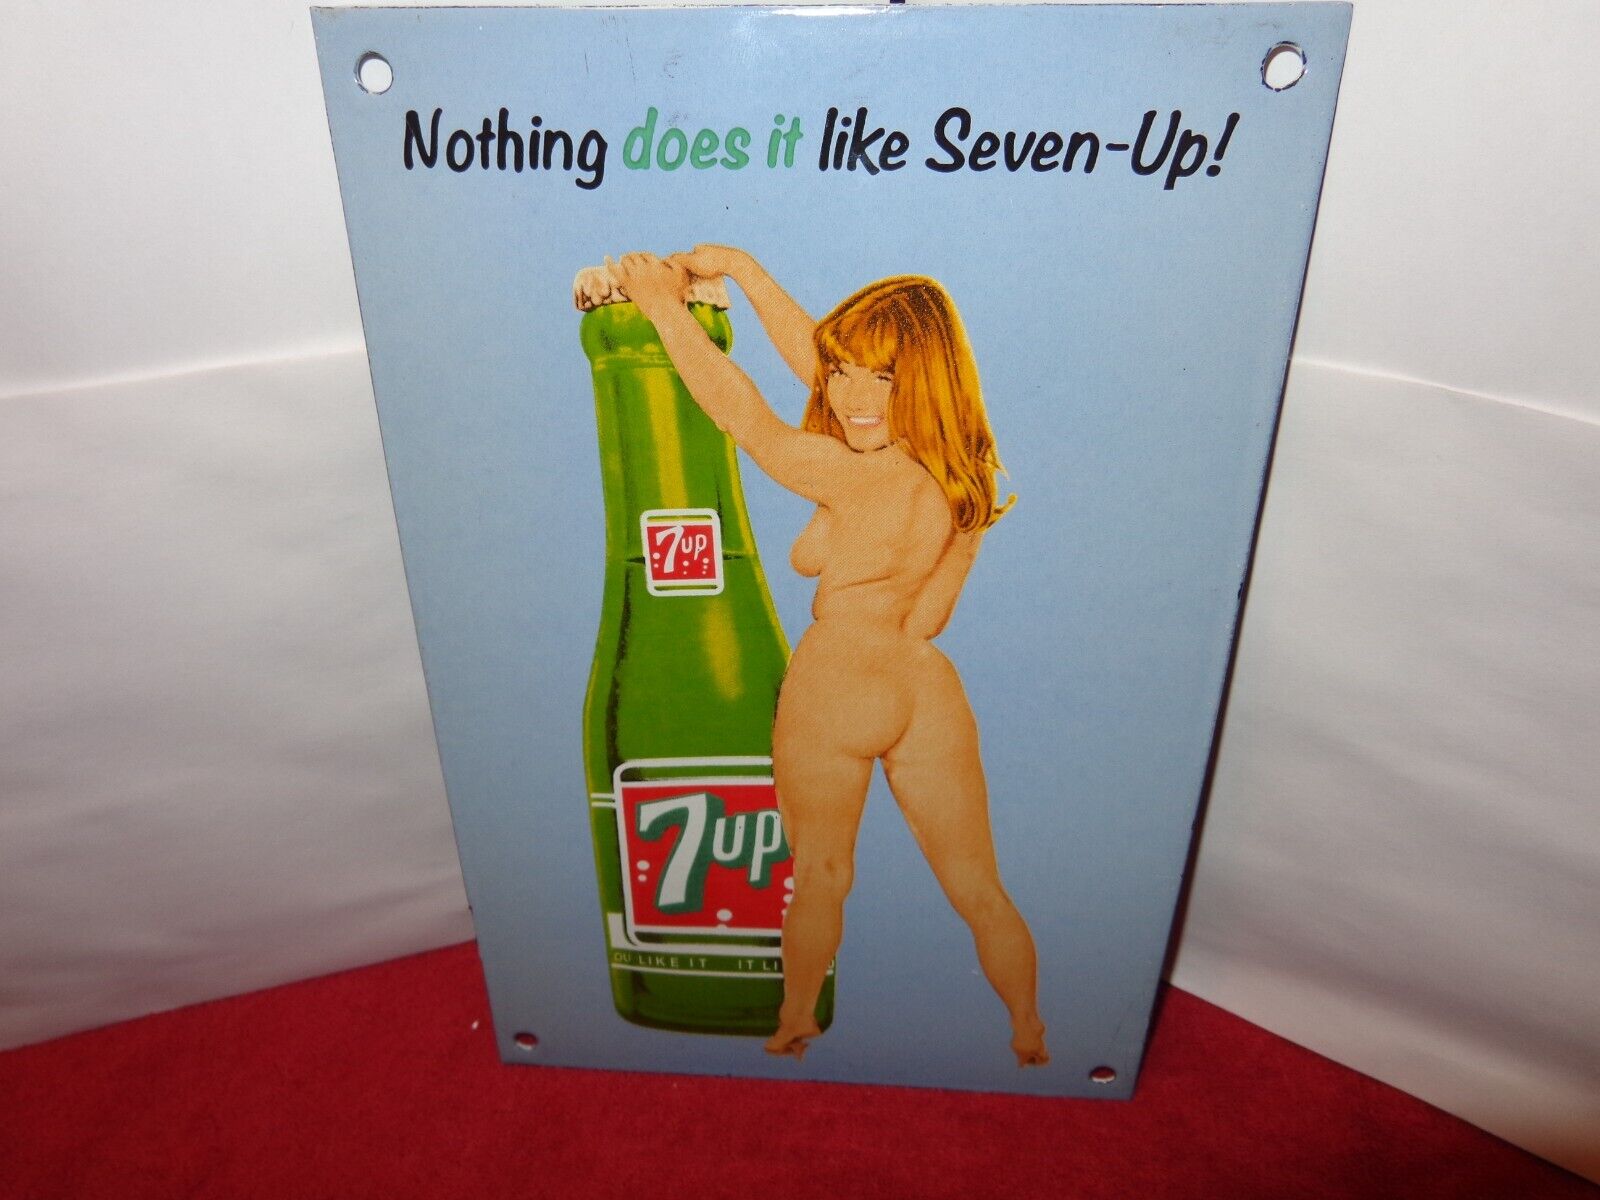 12 x 8 in SEXY LADY 7UP SODA POP SIGN HEAVY METAL PORCELAIN GREAT GRAPHICS # 945